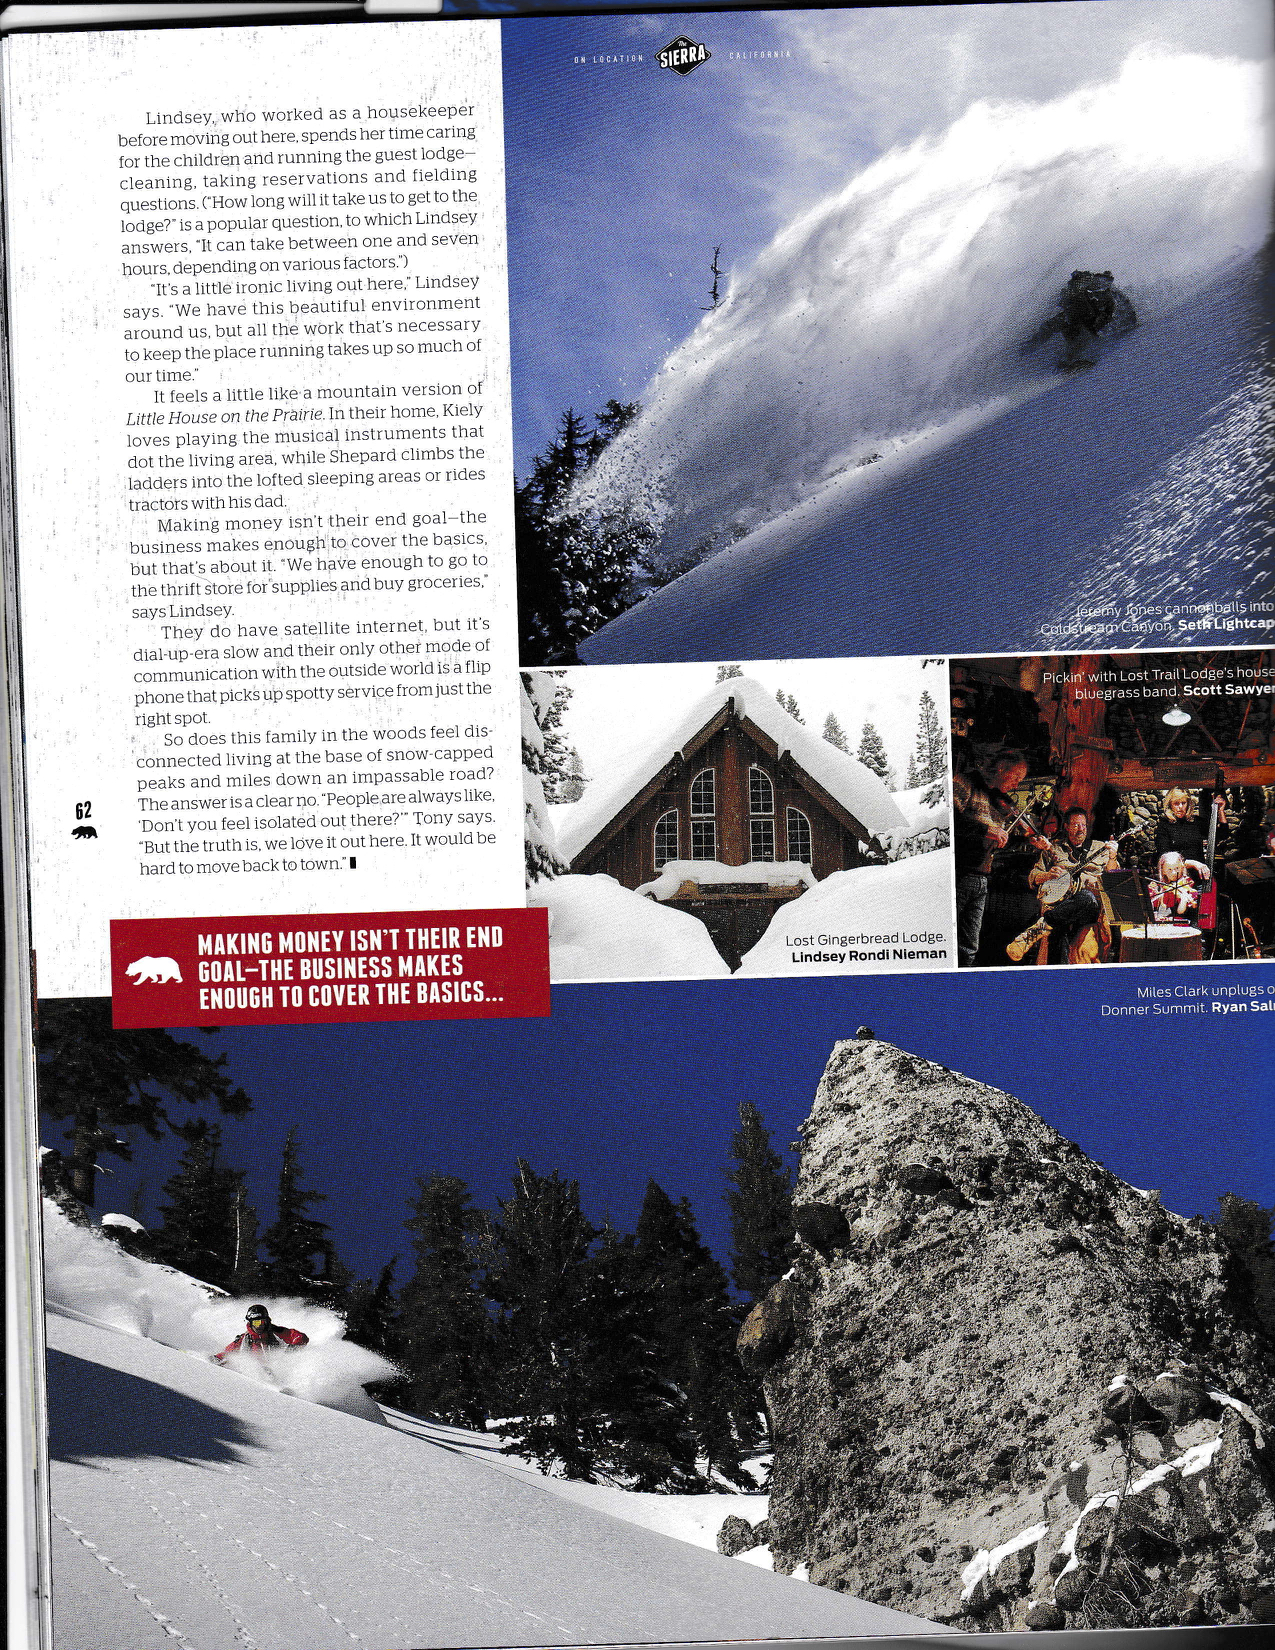 Photo of Miles Clark ripping powder at Donner Summit, CA in the Backcountry Magazine in Nov. 2015. 